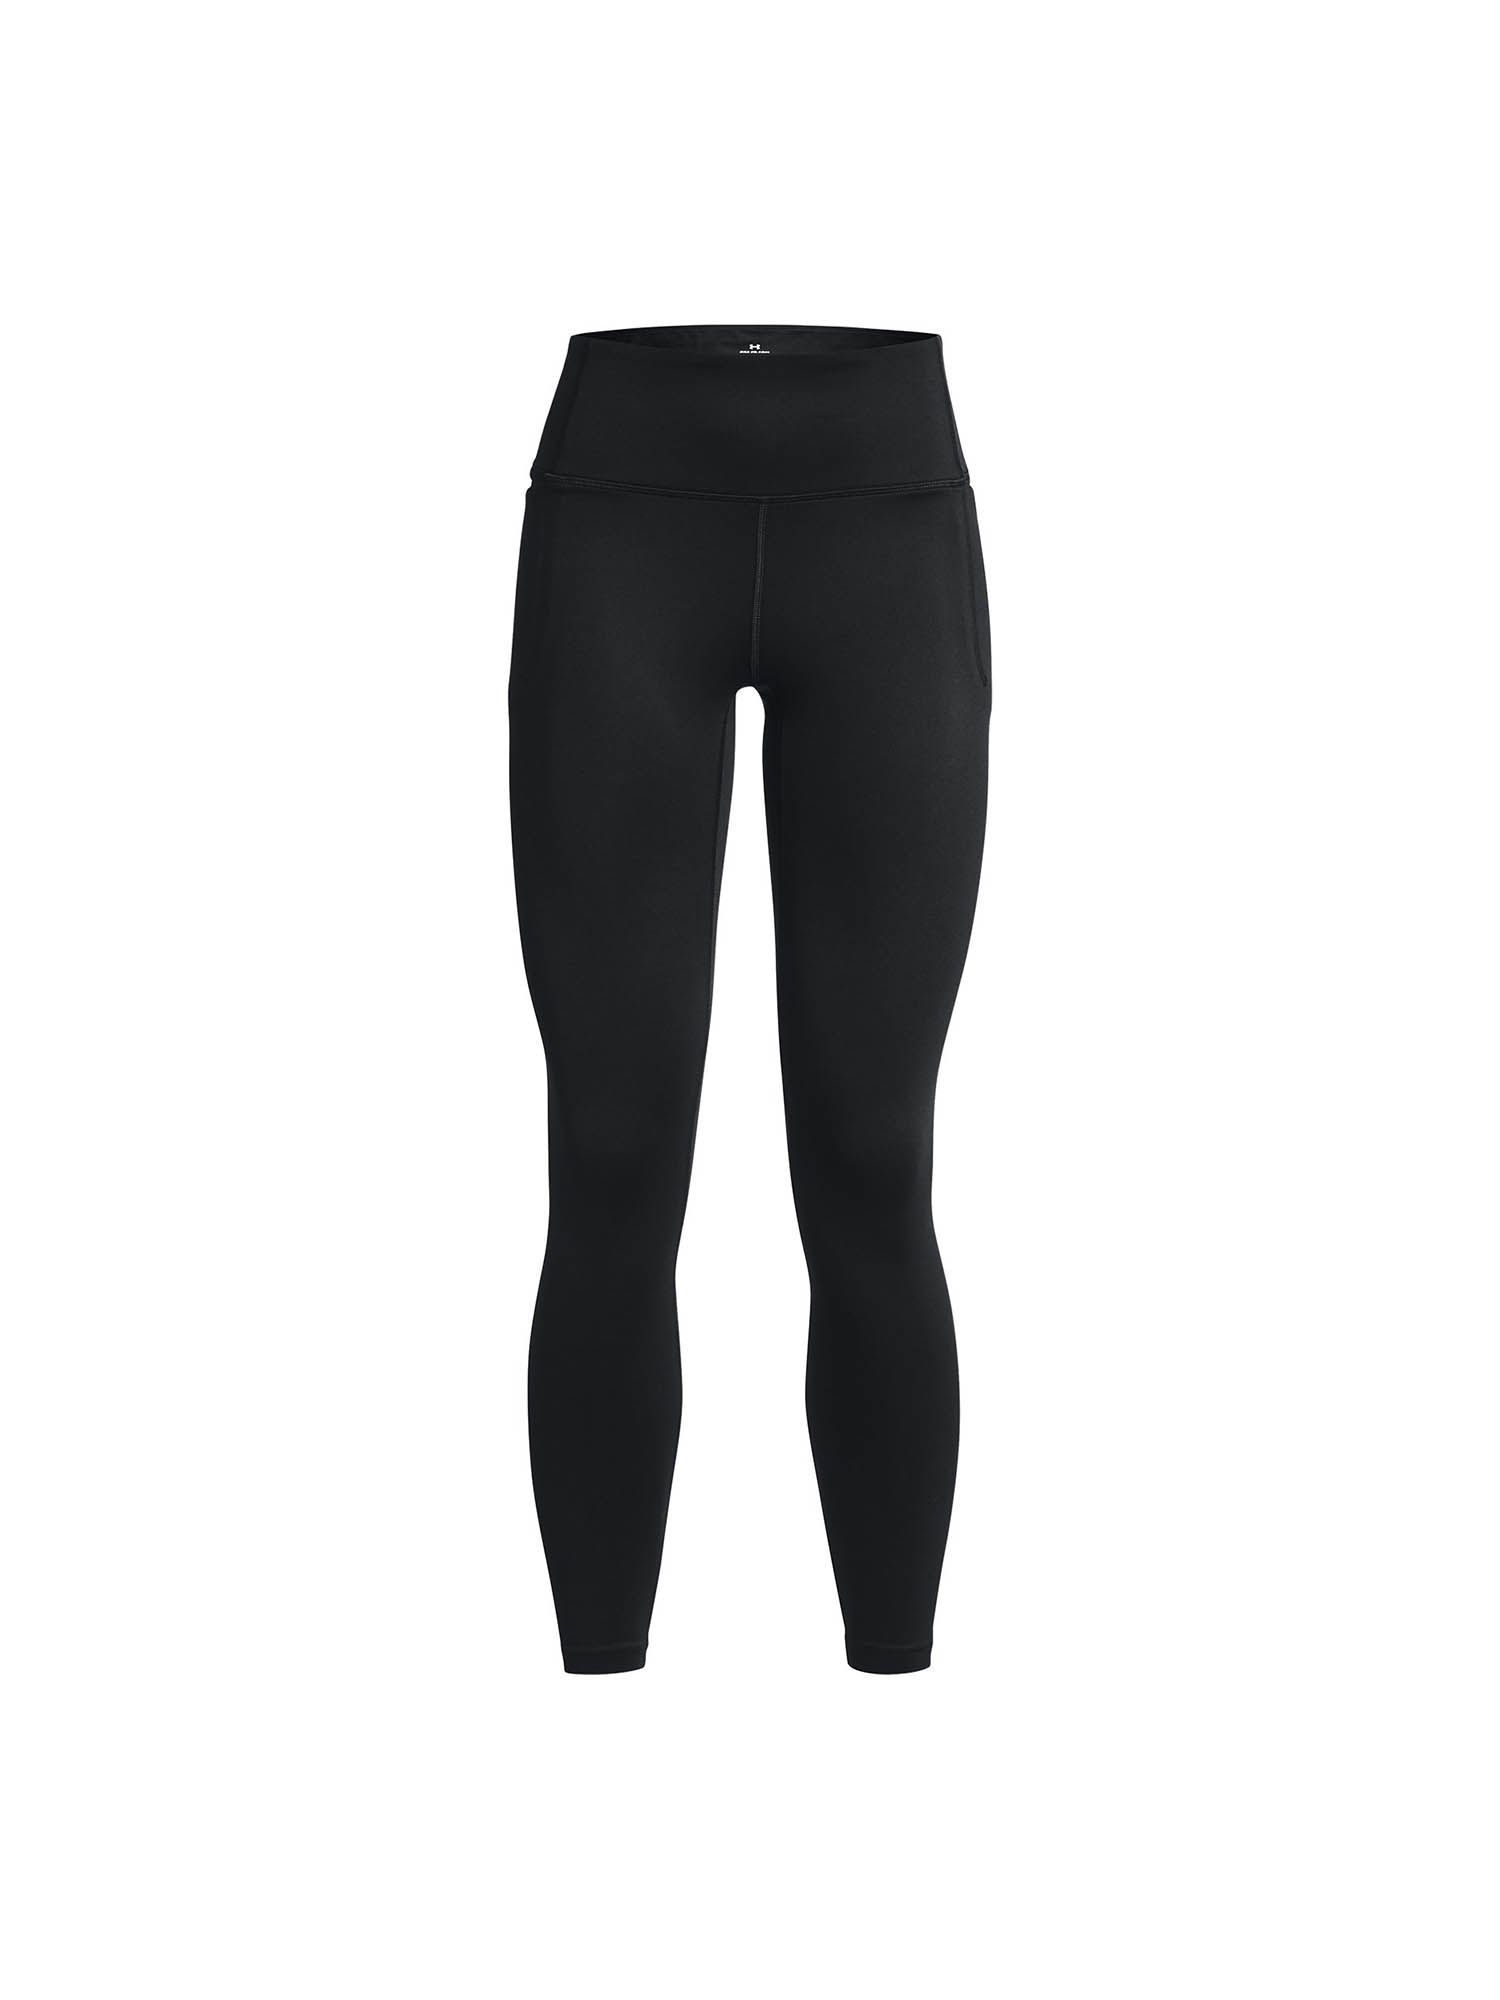 DSG Girls' Cold Weather Compression Tights | Dick's Sporting Goods